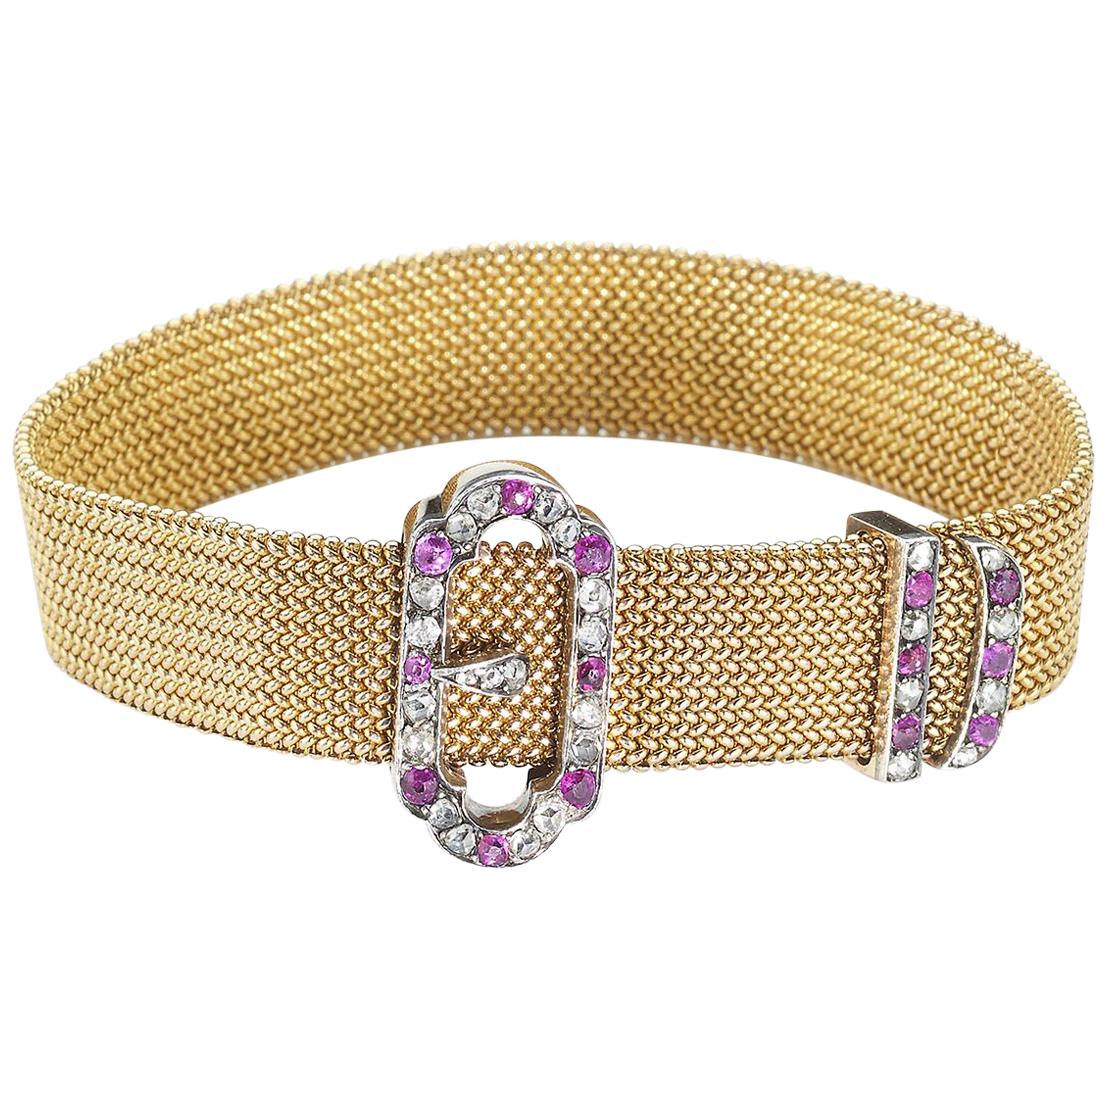 Antique Ruby Diamond Silver and Gold Buckle Bracelet, Circa 1890